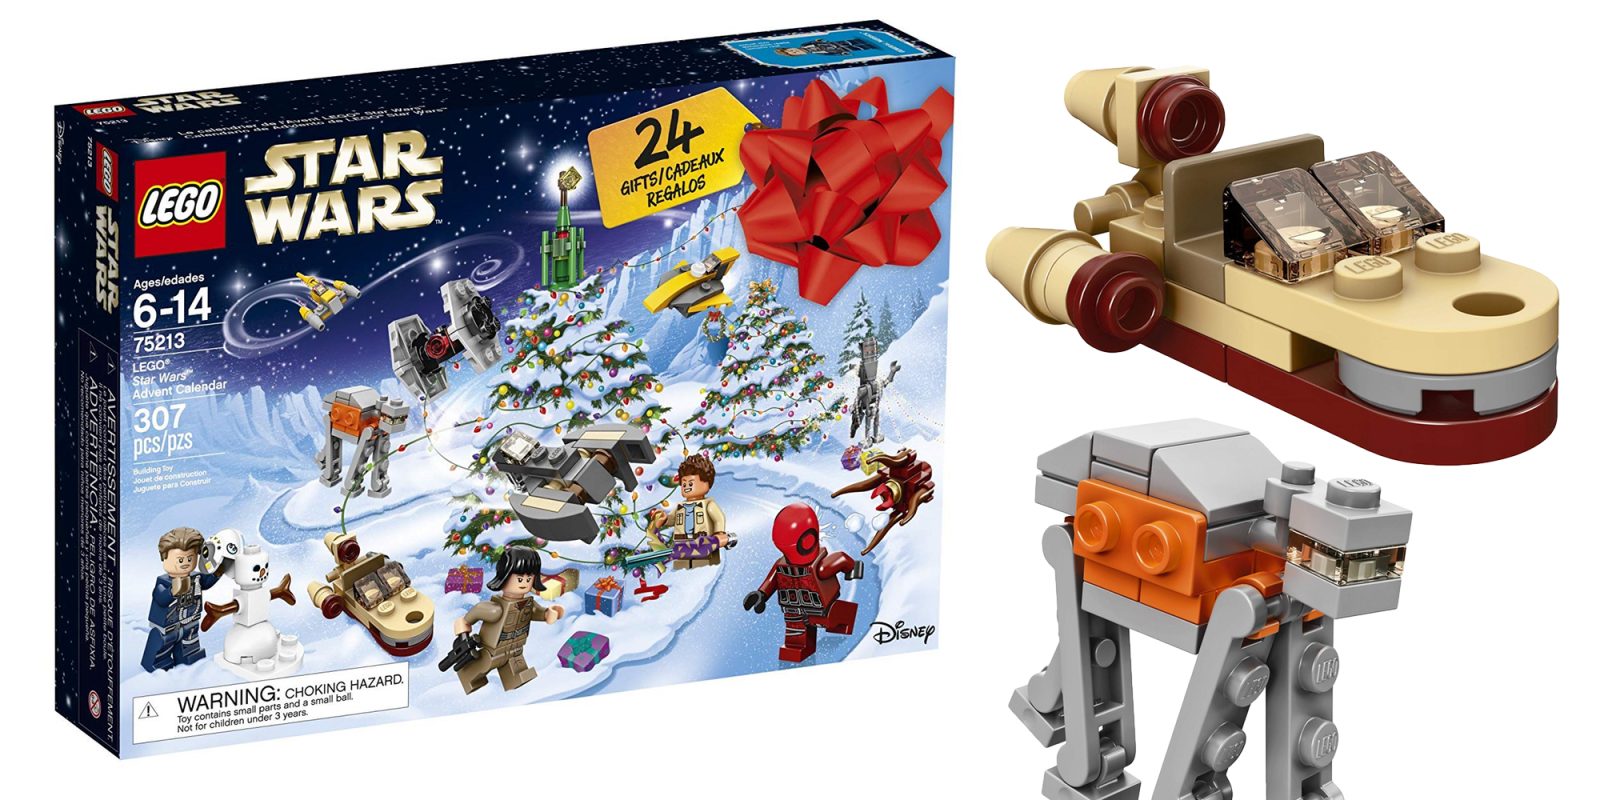 LEGO's 2018 advent calendars are finally available, here's 